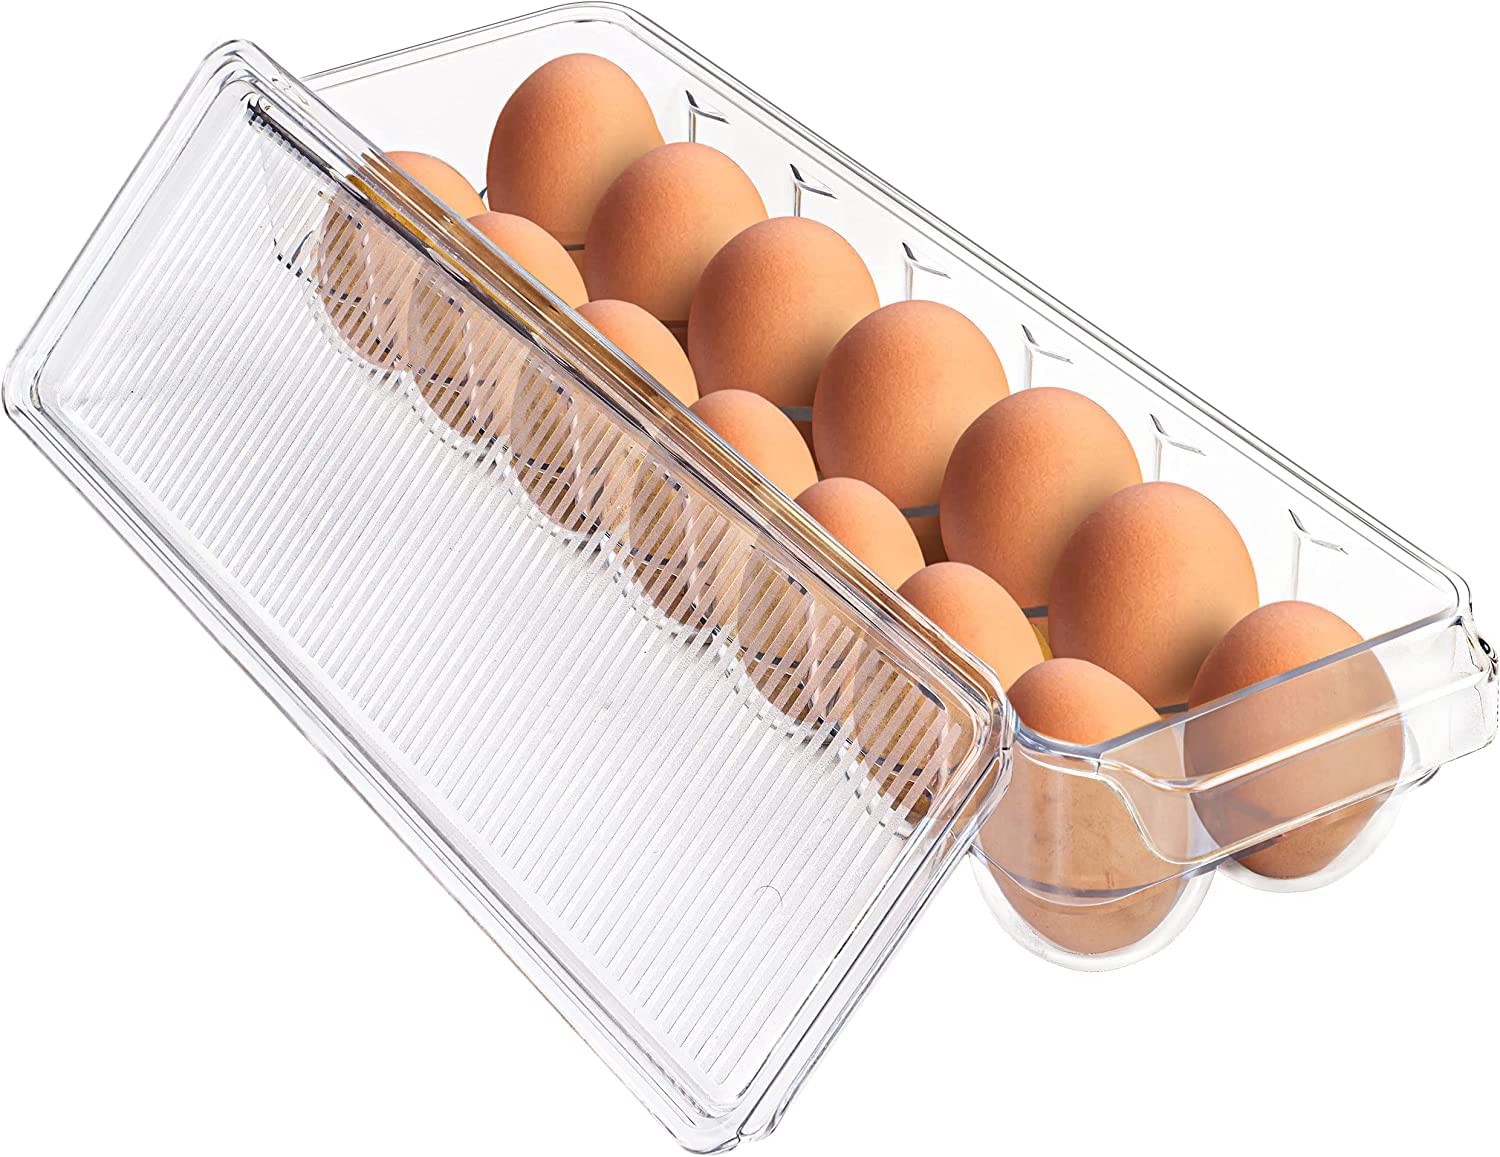 VIO BPA-free Clear Plastic Egg Holder, Egg Container for Refrigerator - 14 Egg Container with Lid & Durable Handle, Plastic Egg Tray Holder for Refrigerator, Kitchen Organization, Stackable (1)